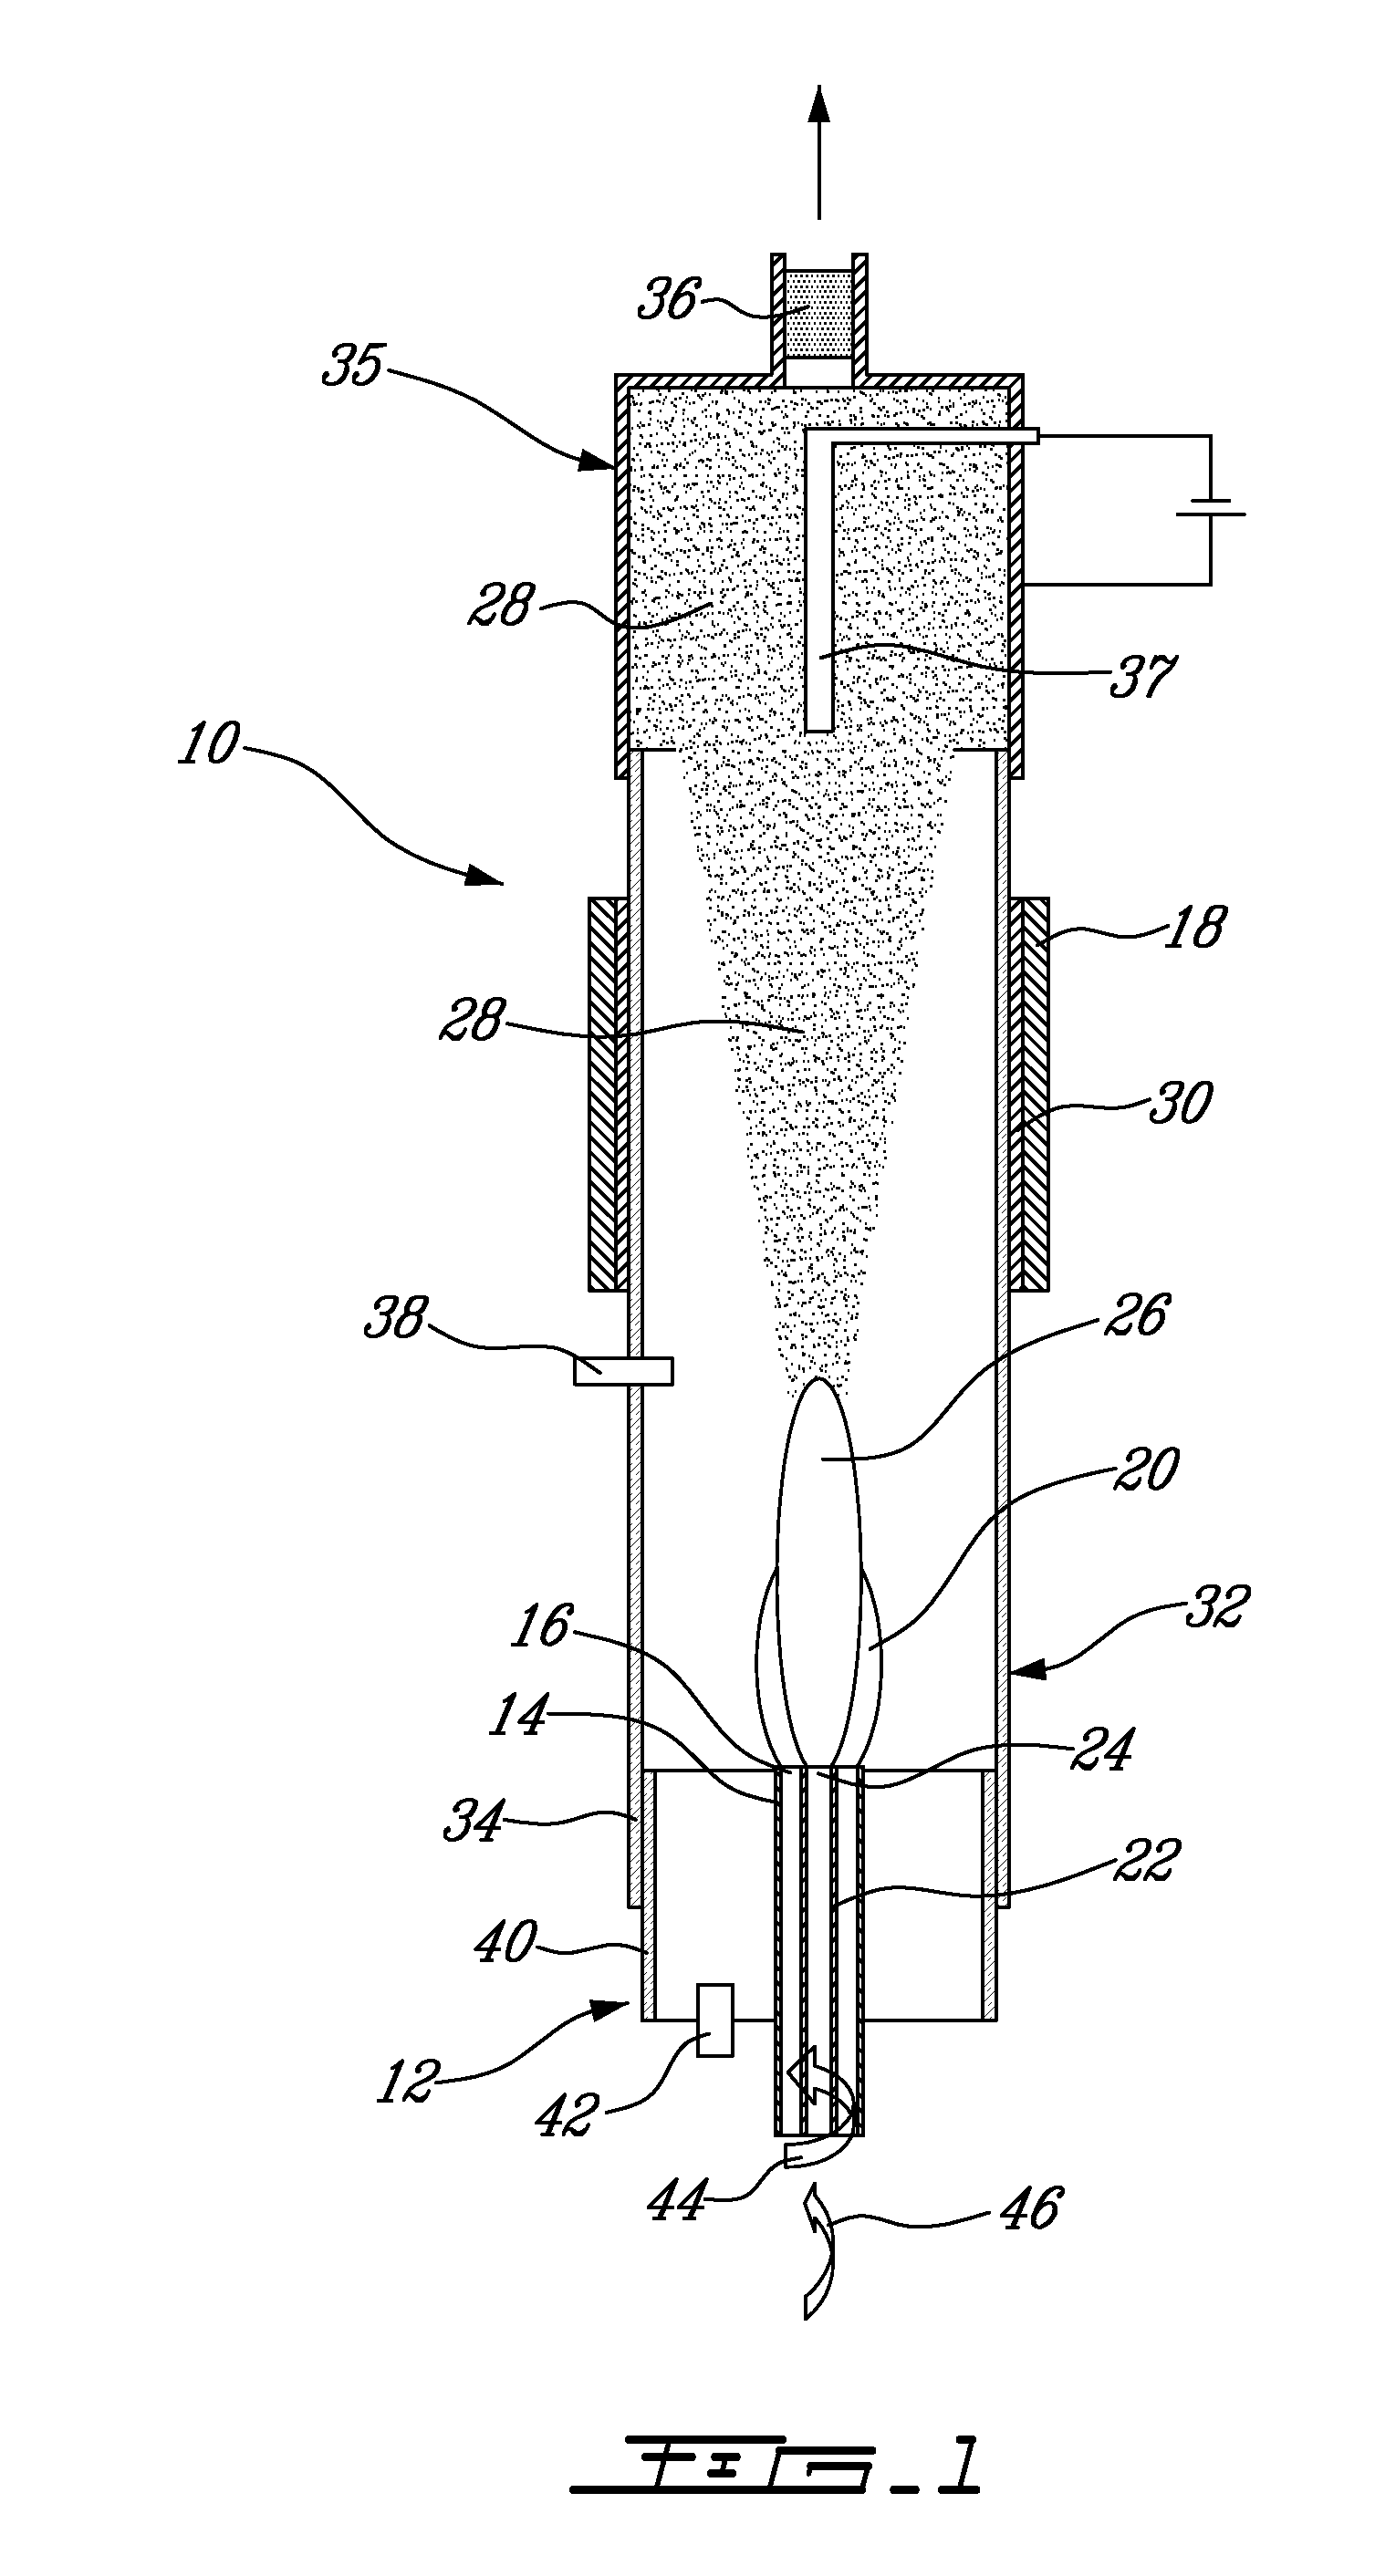 Method and apparatus for producing single-wall carbon nanotubes